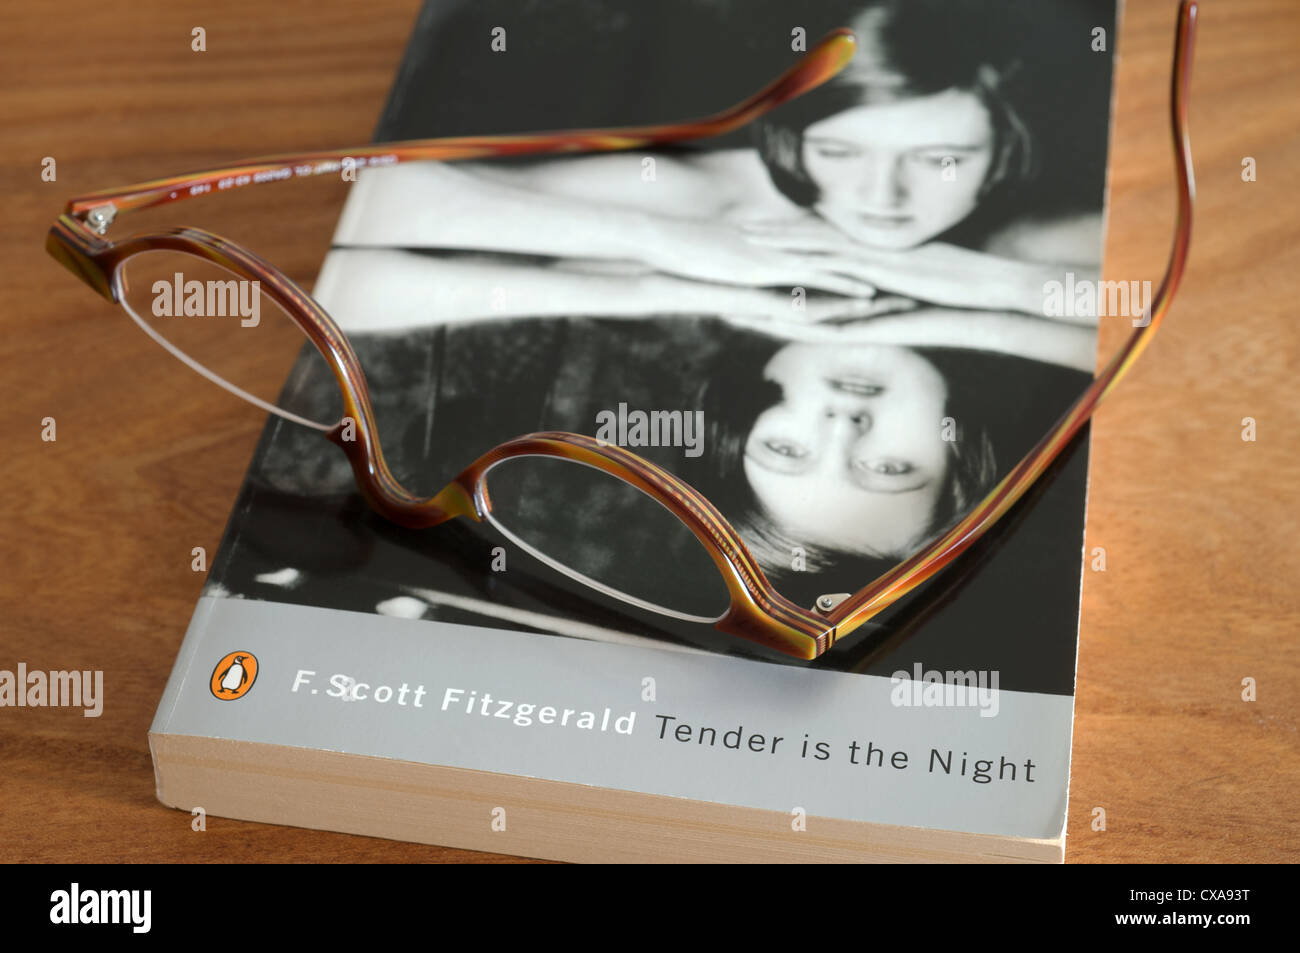 F.Scott Fitzgerald Tender is the night published by Penguin books Stock Photo